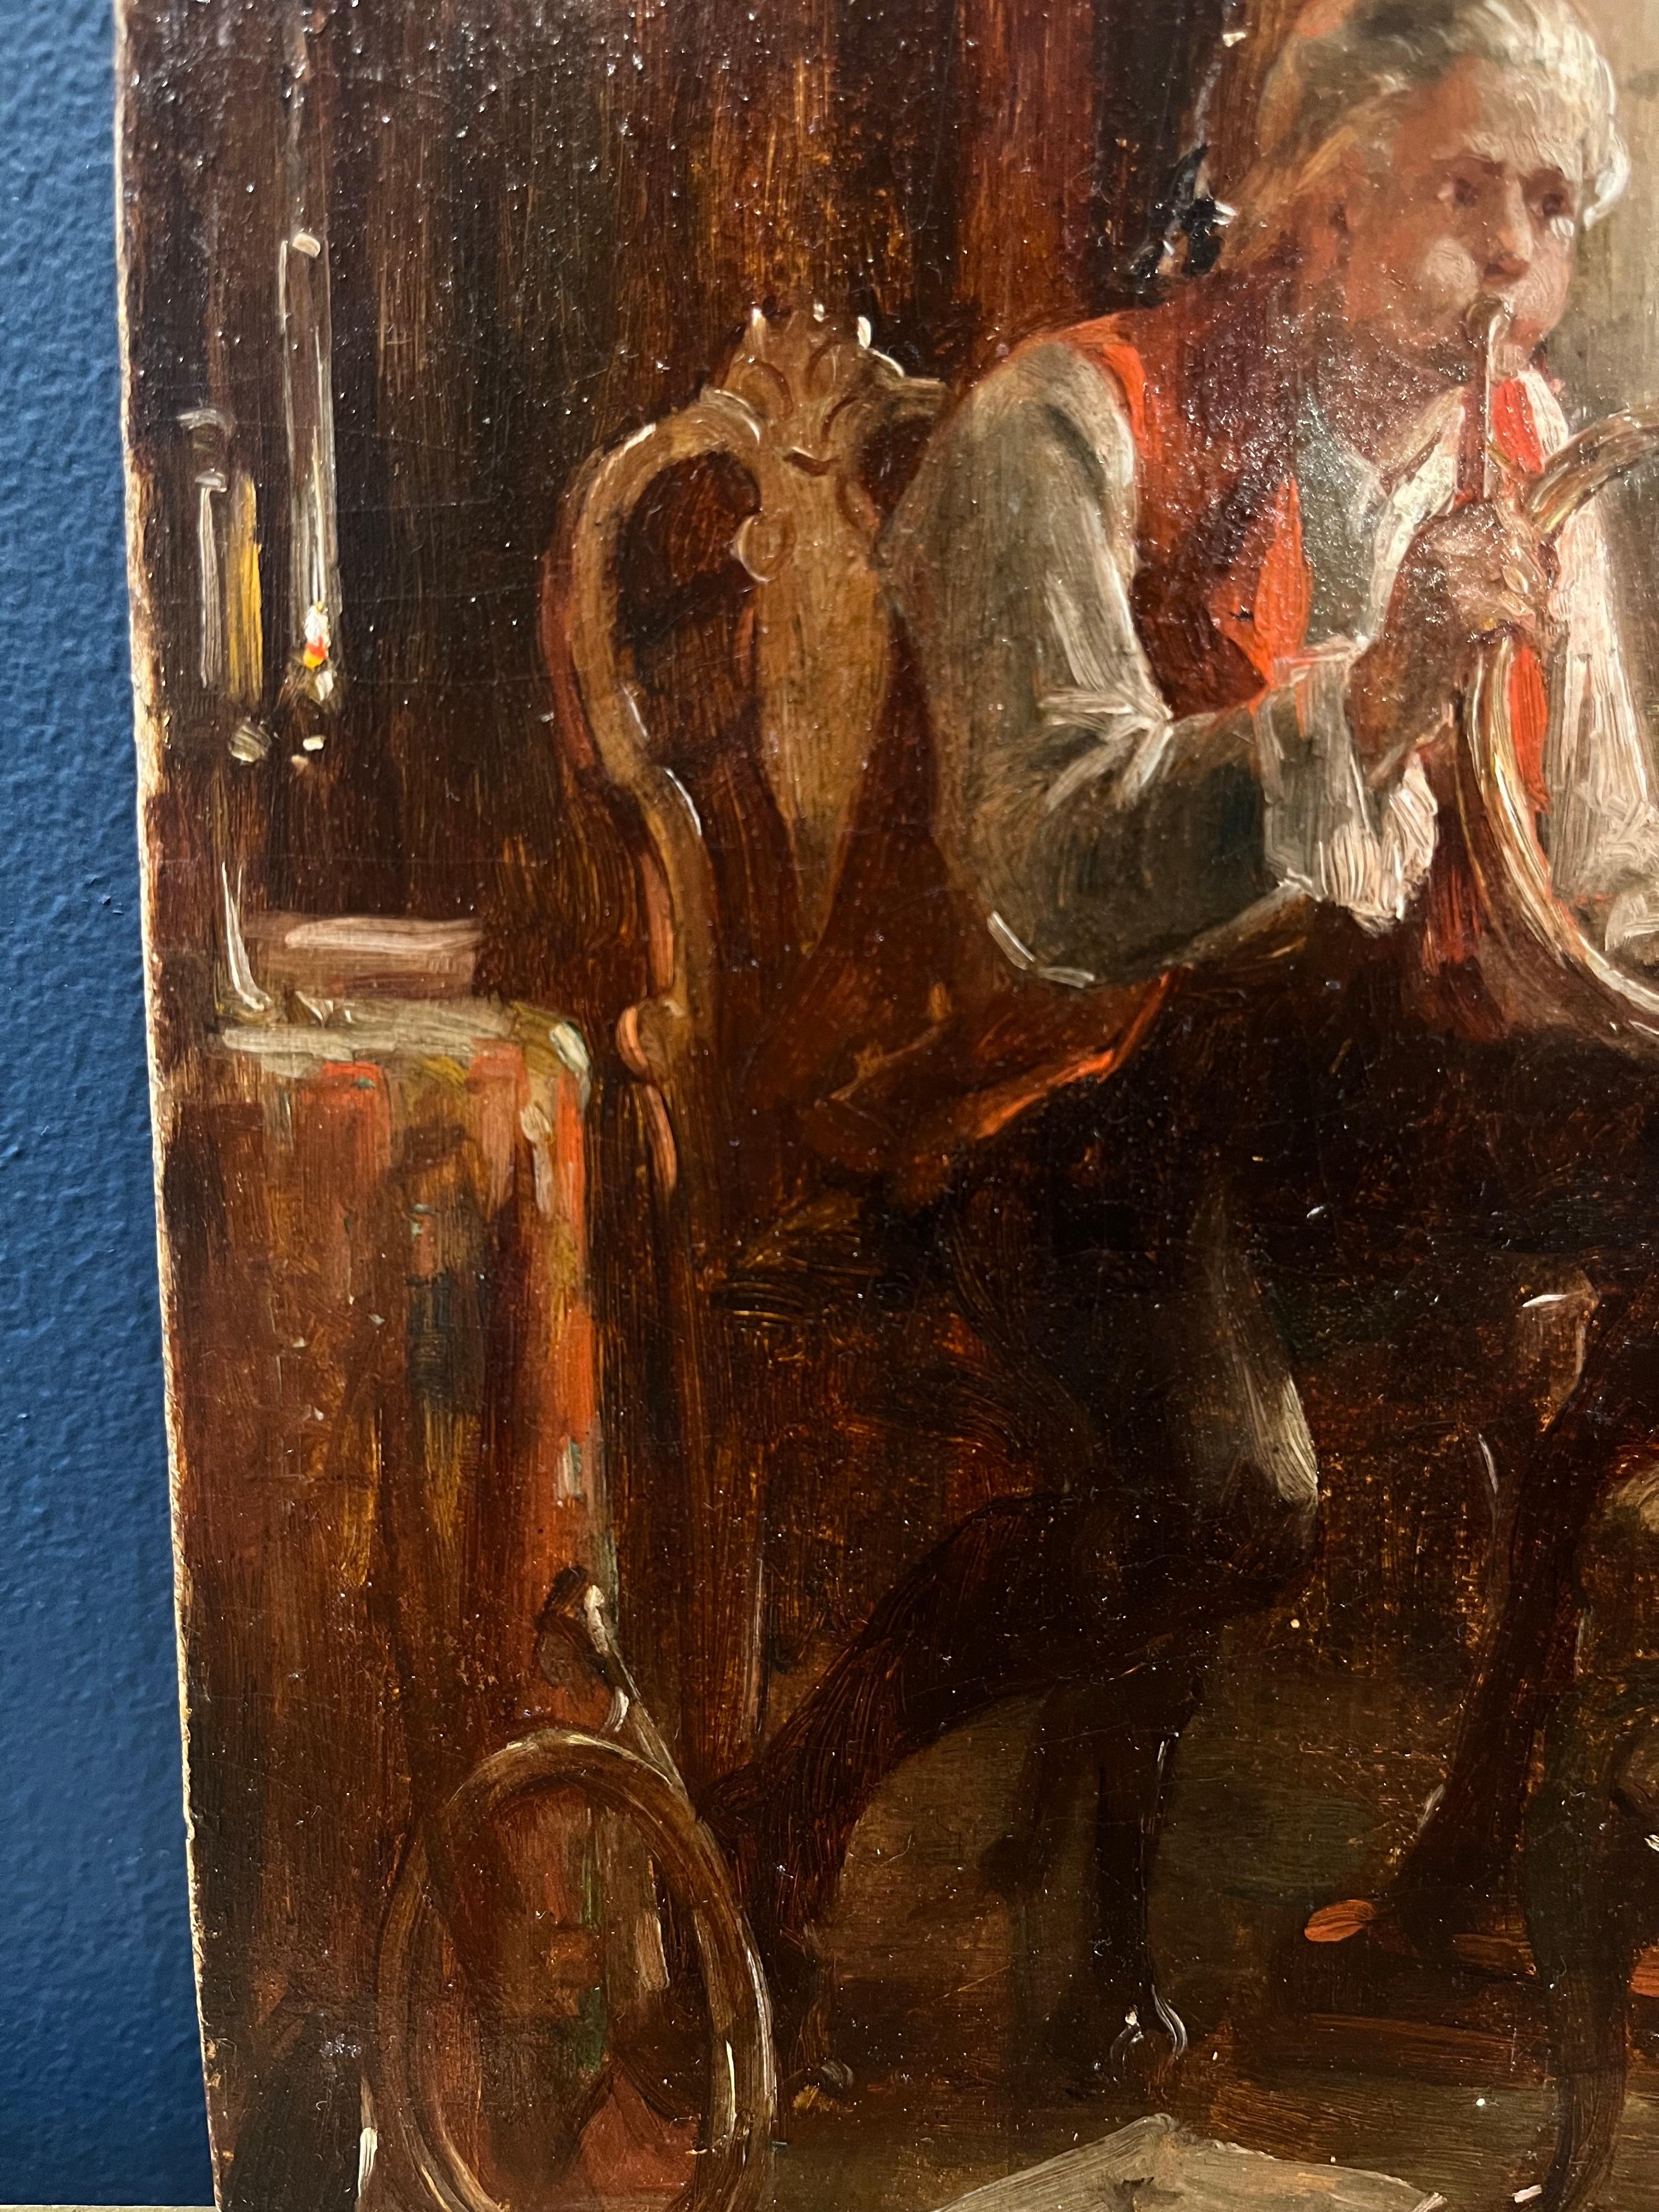 Oil Portrait of Man Playing Music with Horn - American Impressionist Painting by Henry Bacon